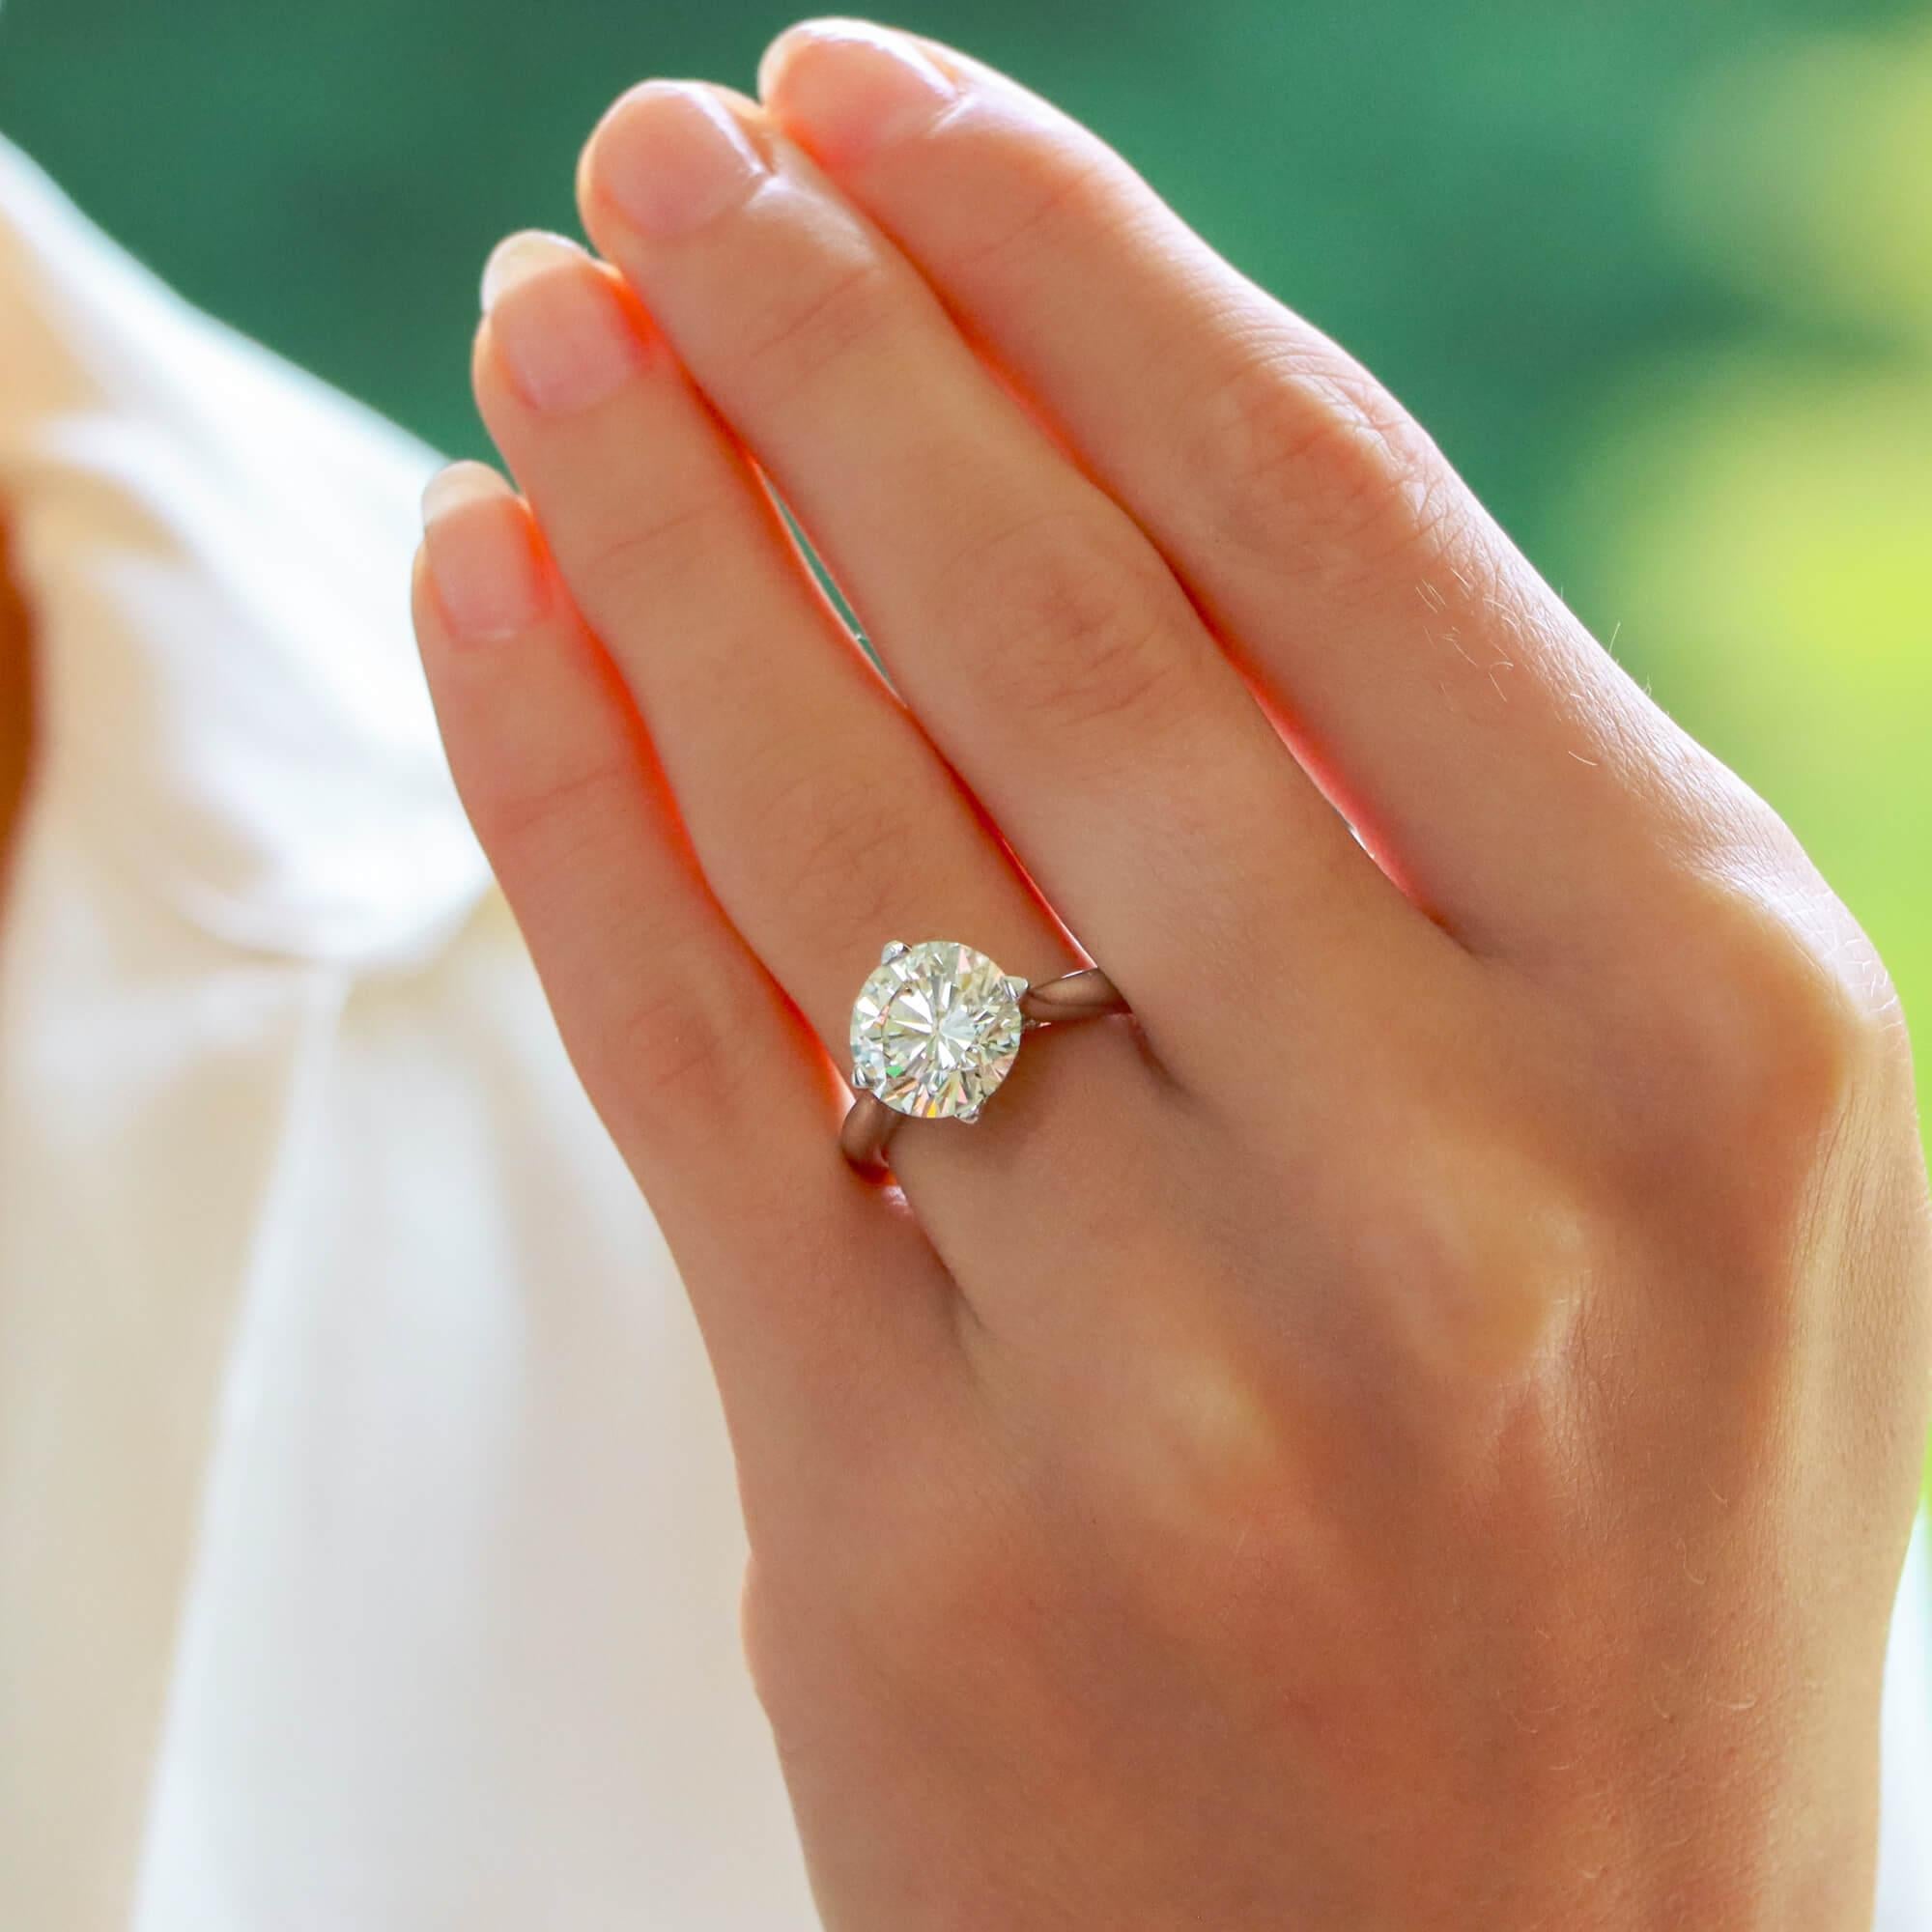 boodles engagement ring